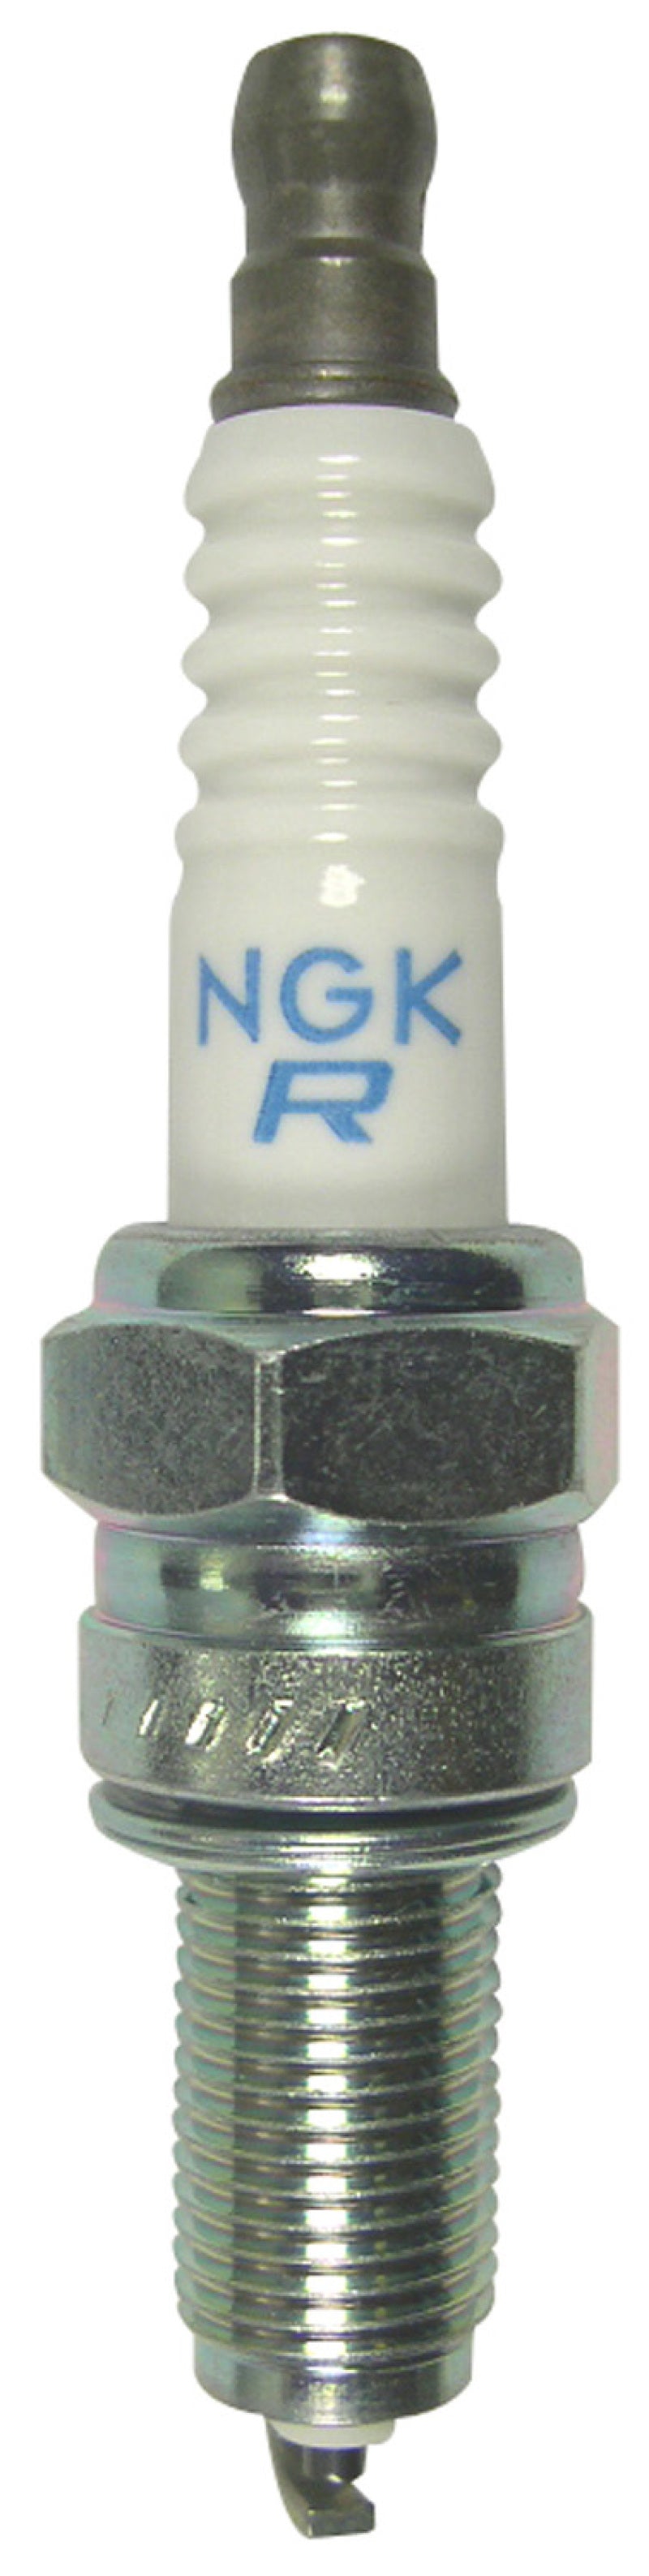 NGK Nickel Spark Plug Box of 10 (CPR6EB-9) -  Shop now at Performance Car Parts